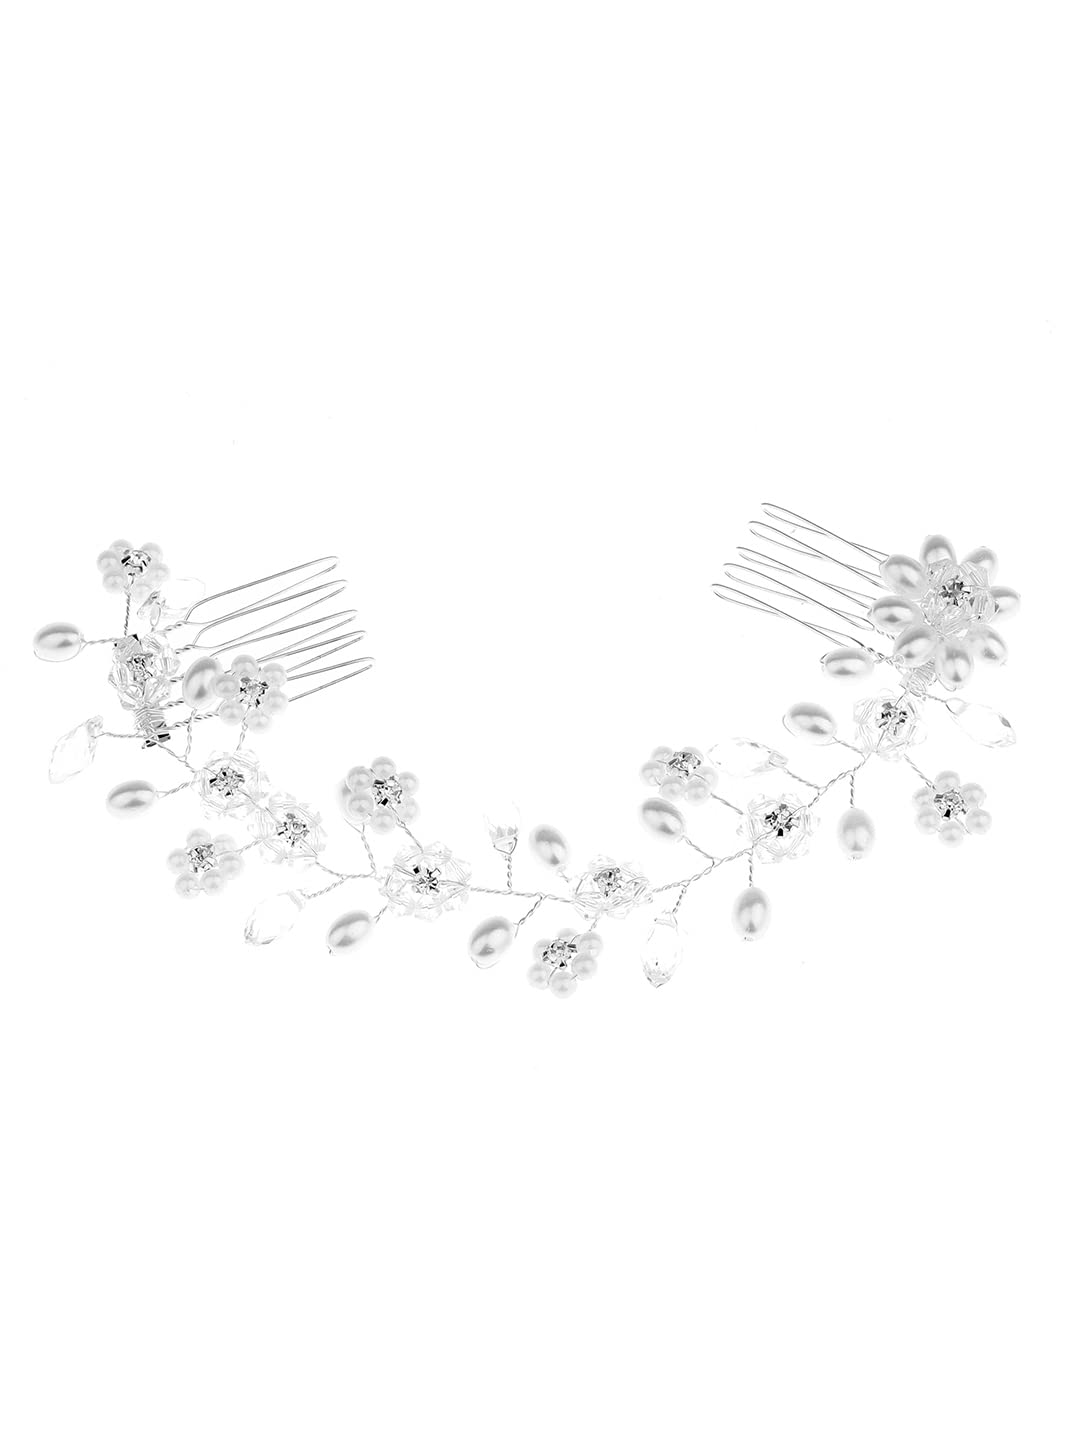 Yellow Chimes Bridal Hair Vine For Women And Girls Bridal Hair Accessories For Wedding White Comb Pin For Women Hair Accessories Wedding Jewellery For Women Comb Pin Hair Clip/Side Pin/Jooda Pin Hair